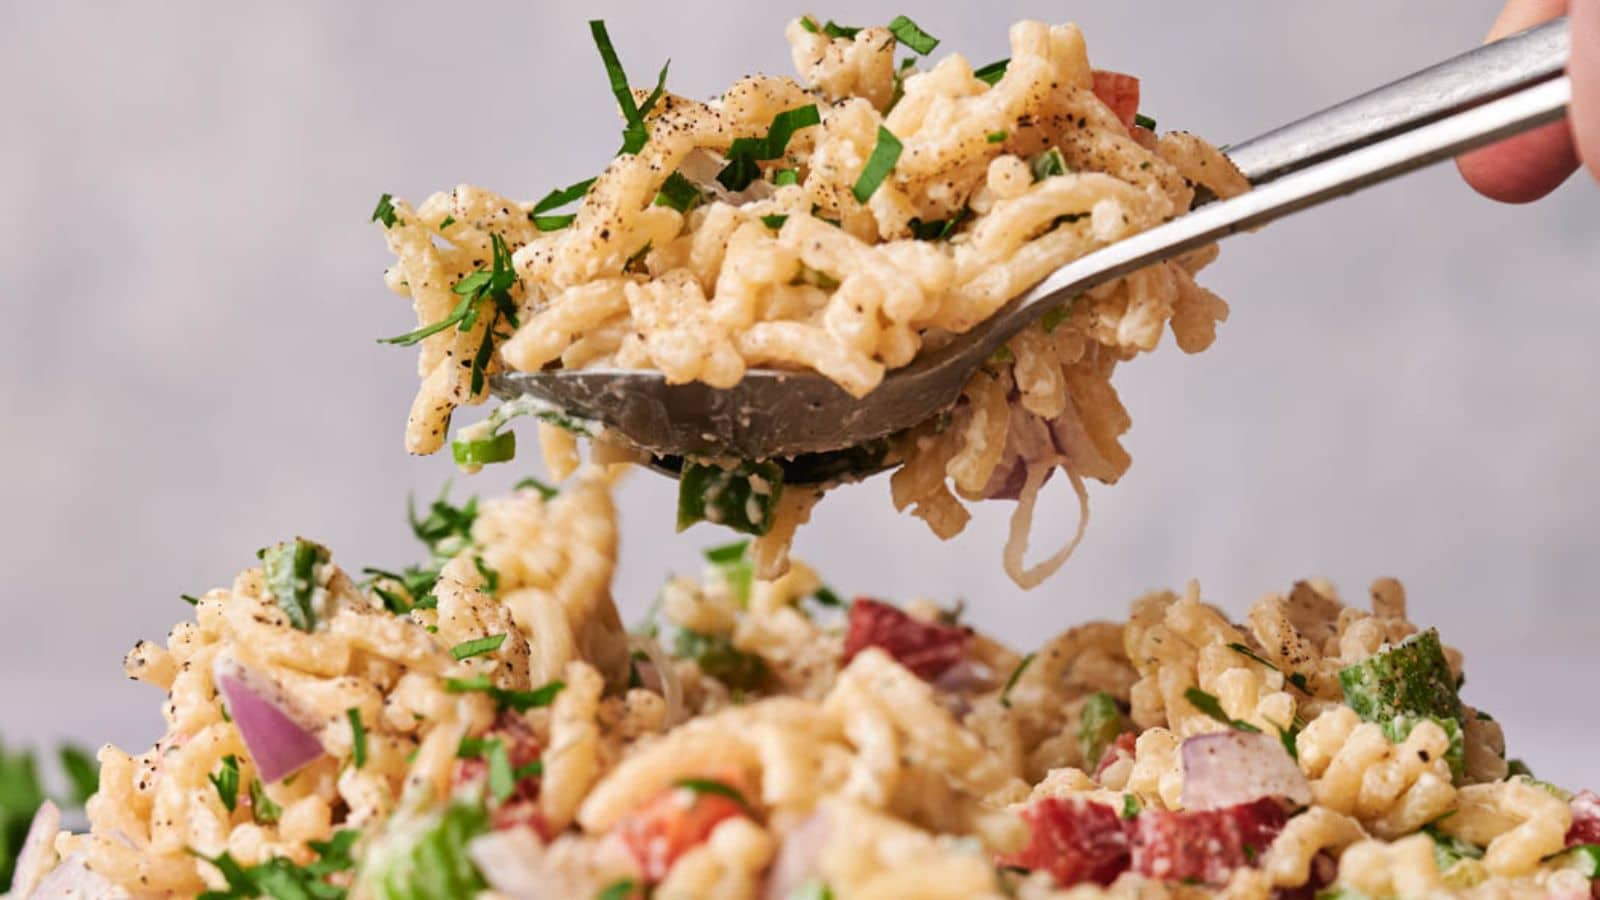 <p>Our macaroni salad is a creamy, comforting classic that never fails to please. It’s the perfect blend of soft pasta and crisp veggies, topped with a dressing that ties it all together. Ideal for picnics, potlucks, or as a side dish at home, it brings back nostalgic memories of family gatherings. This dish makes tackling Monday meals something to look forward to.<br><strong>Get the Recipe: </strong><a href="https://www.splashoftaste.com/best-macaroni-salad-recipe/?utm_source=msn&utm_medium=page&utm_campaign=msn">Macaroni Salad</a></p>